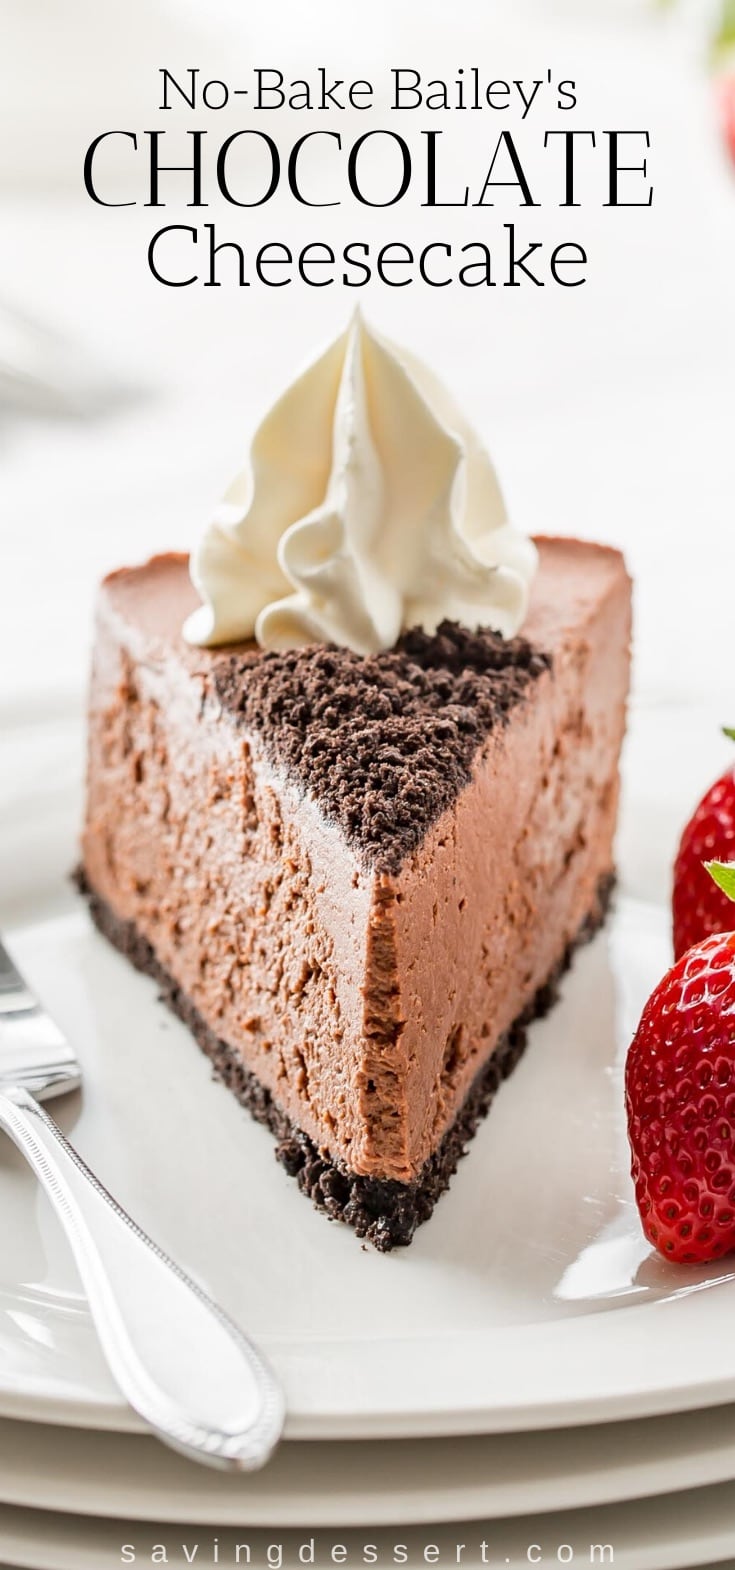 A slice of chocolate cheesecake topped with whipped cream